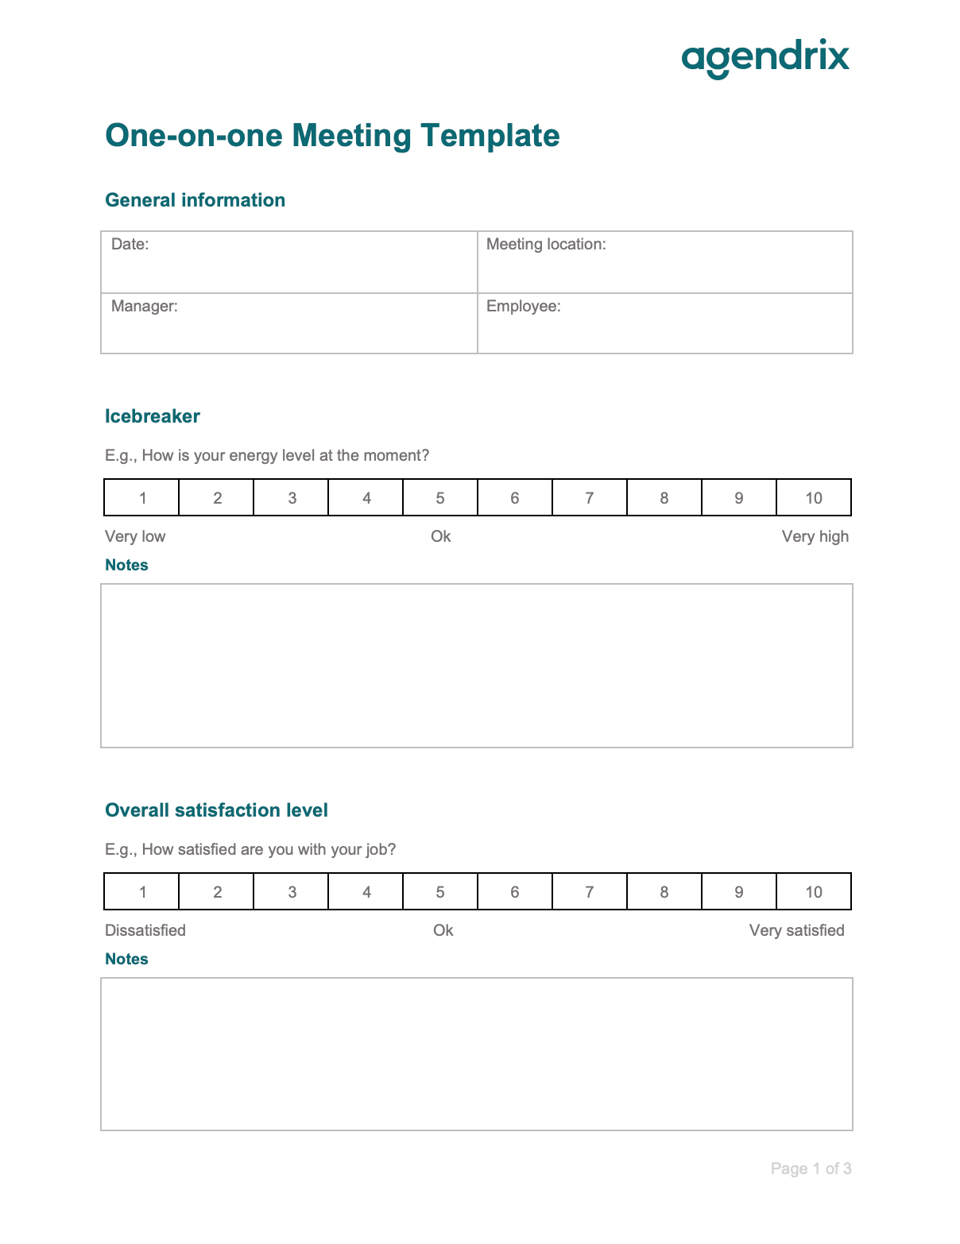 Word one-on-one meeting template